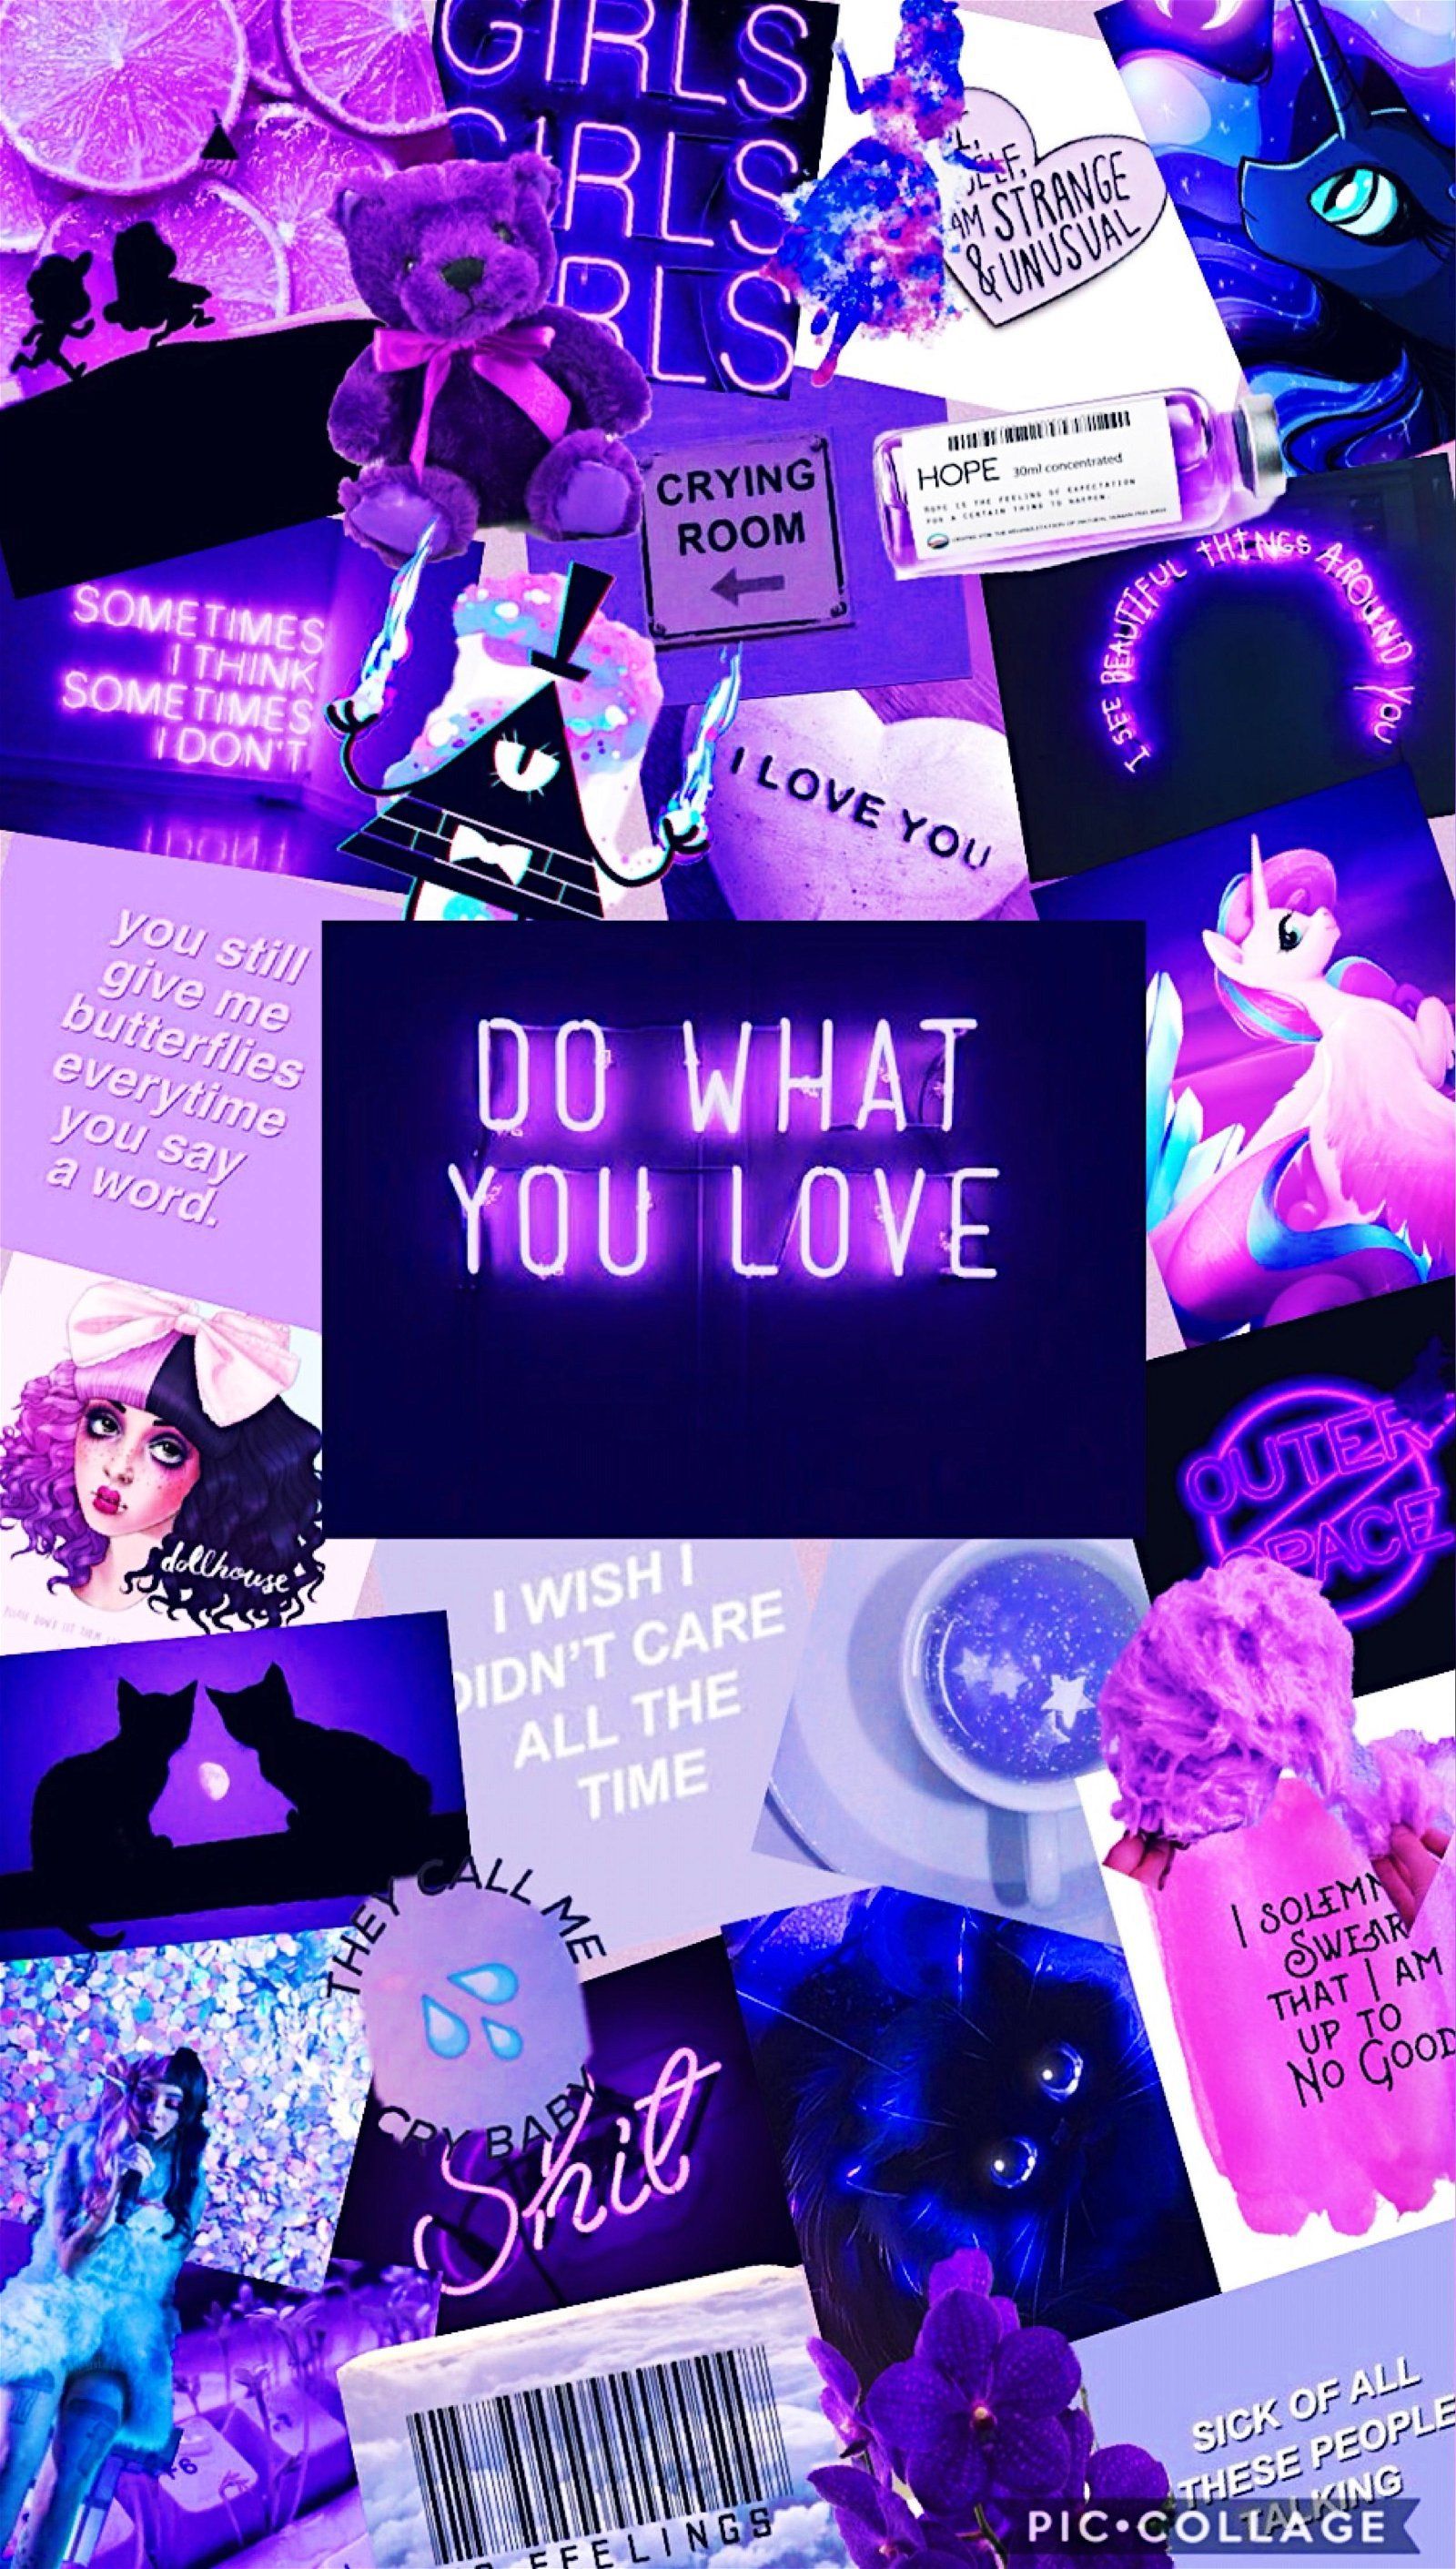 I made a purple and blue aesthetic collage! I hope you like it! - Violet